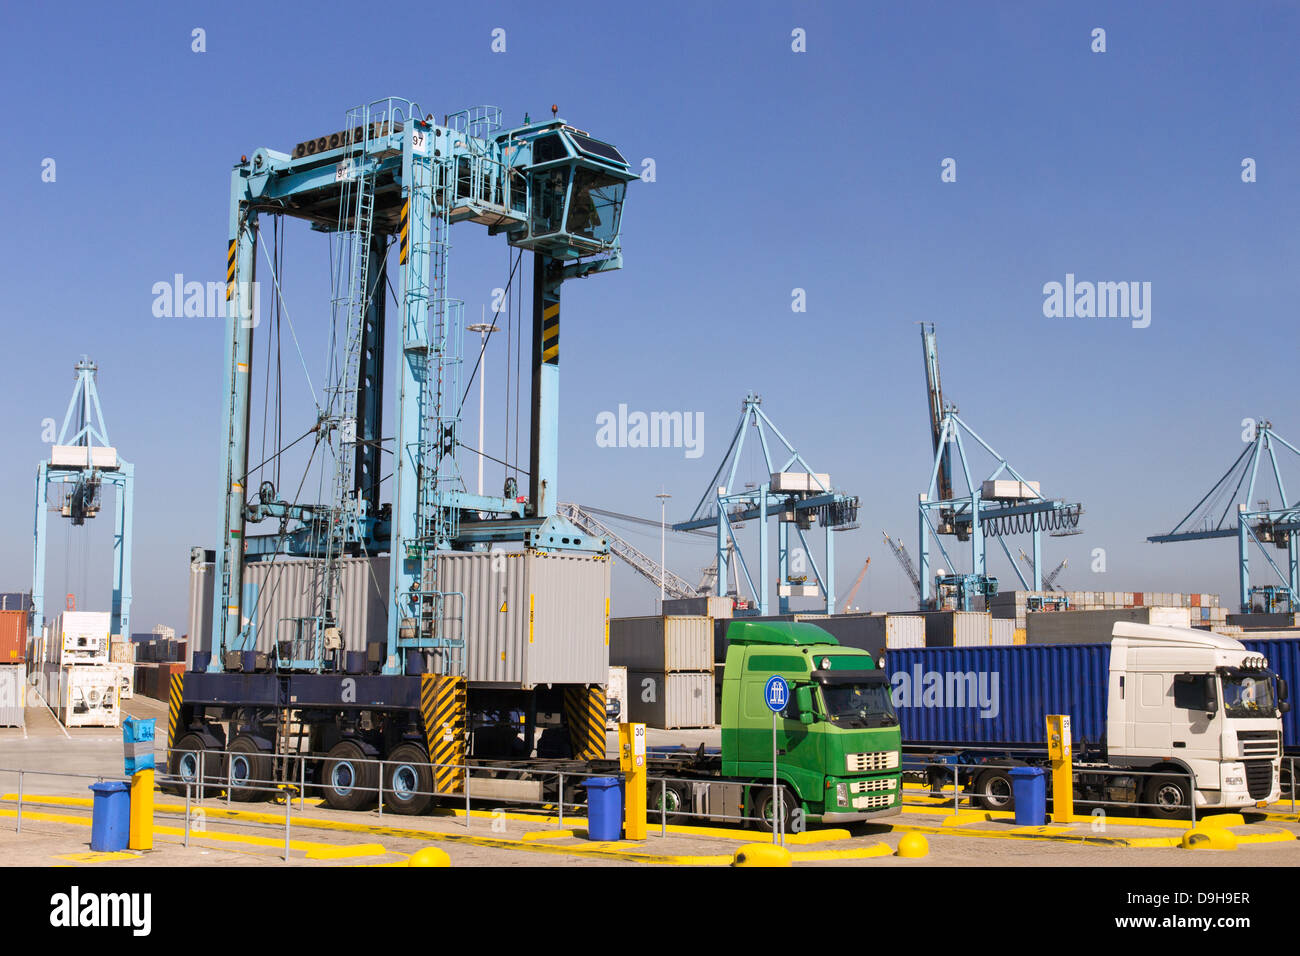 Mobile container spreader placing a container on a truck trailer in a large port. Stock Photo